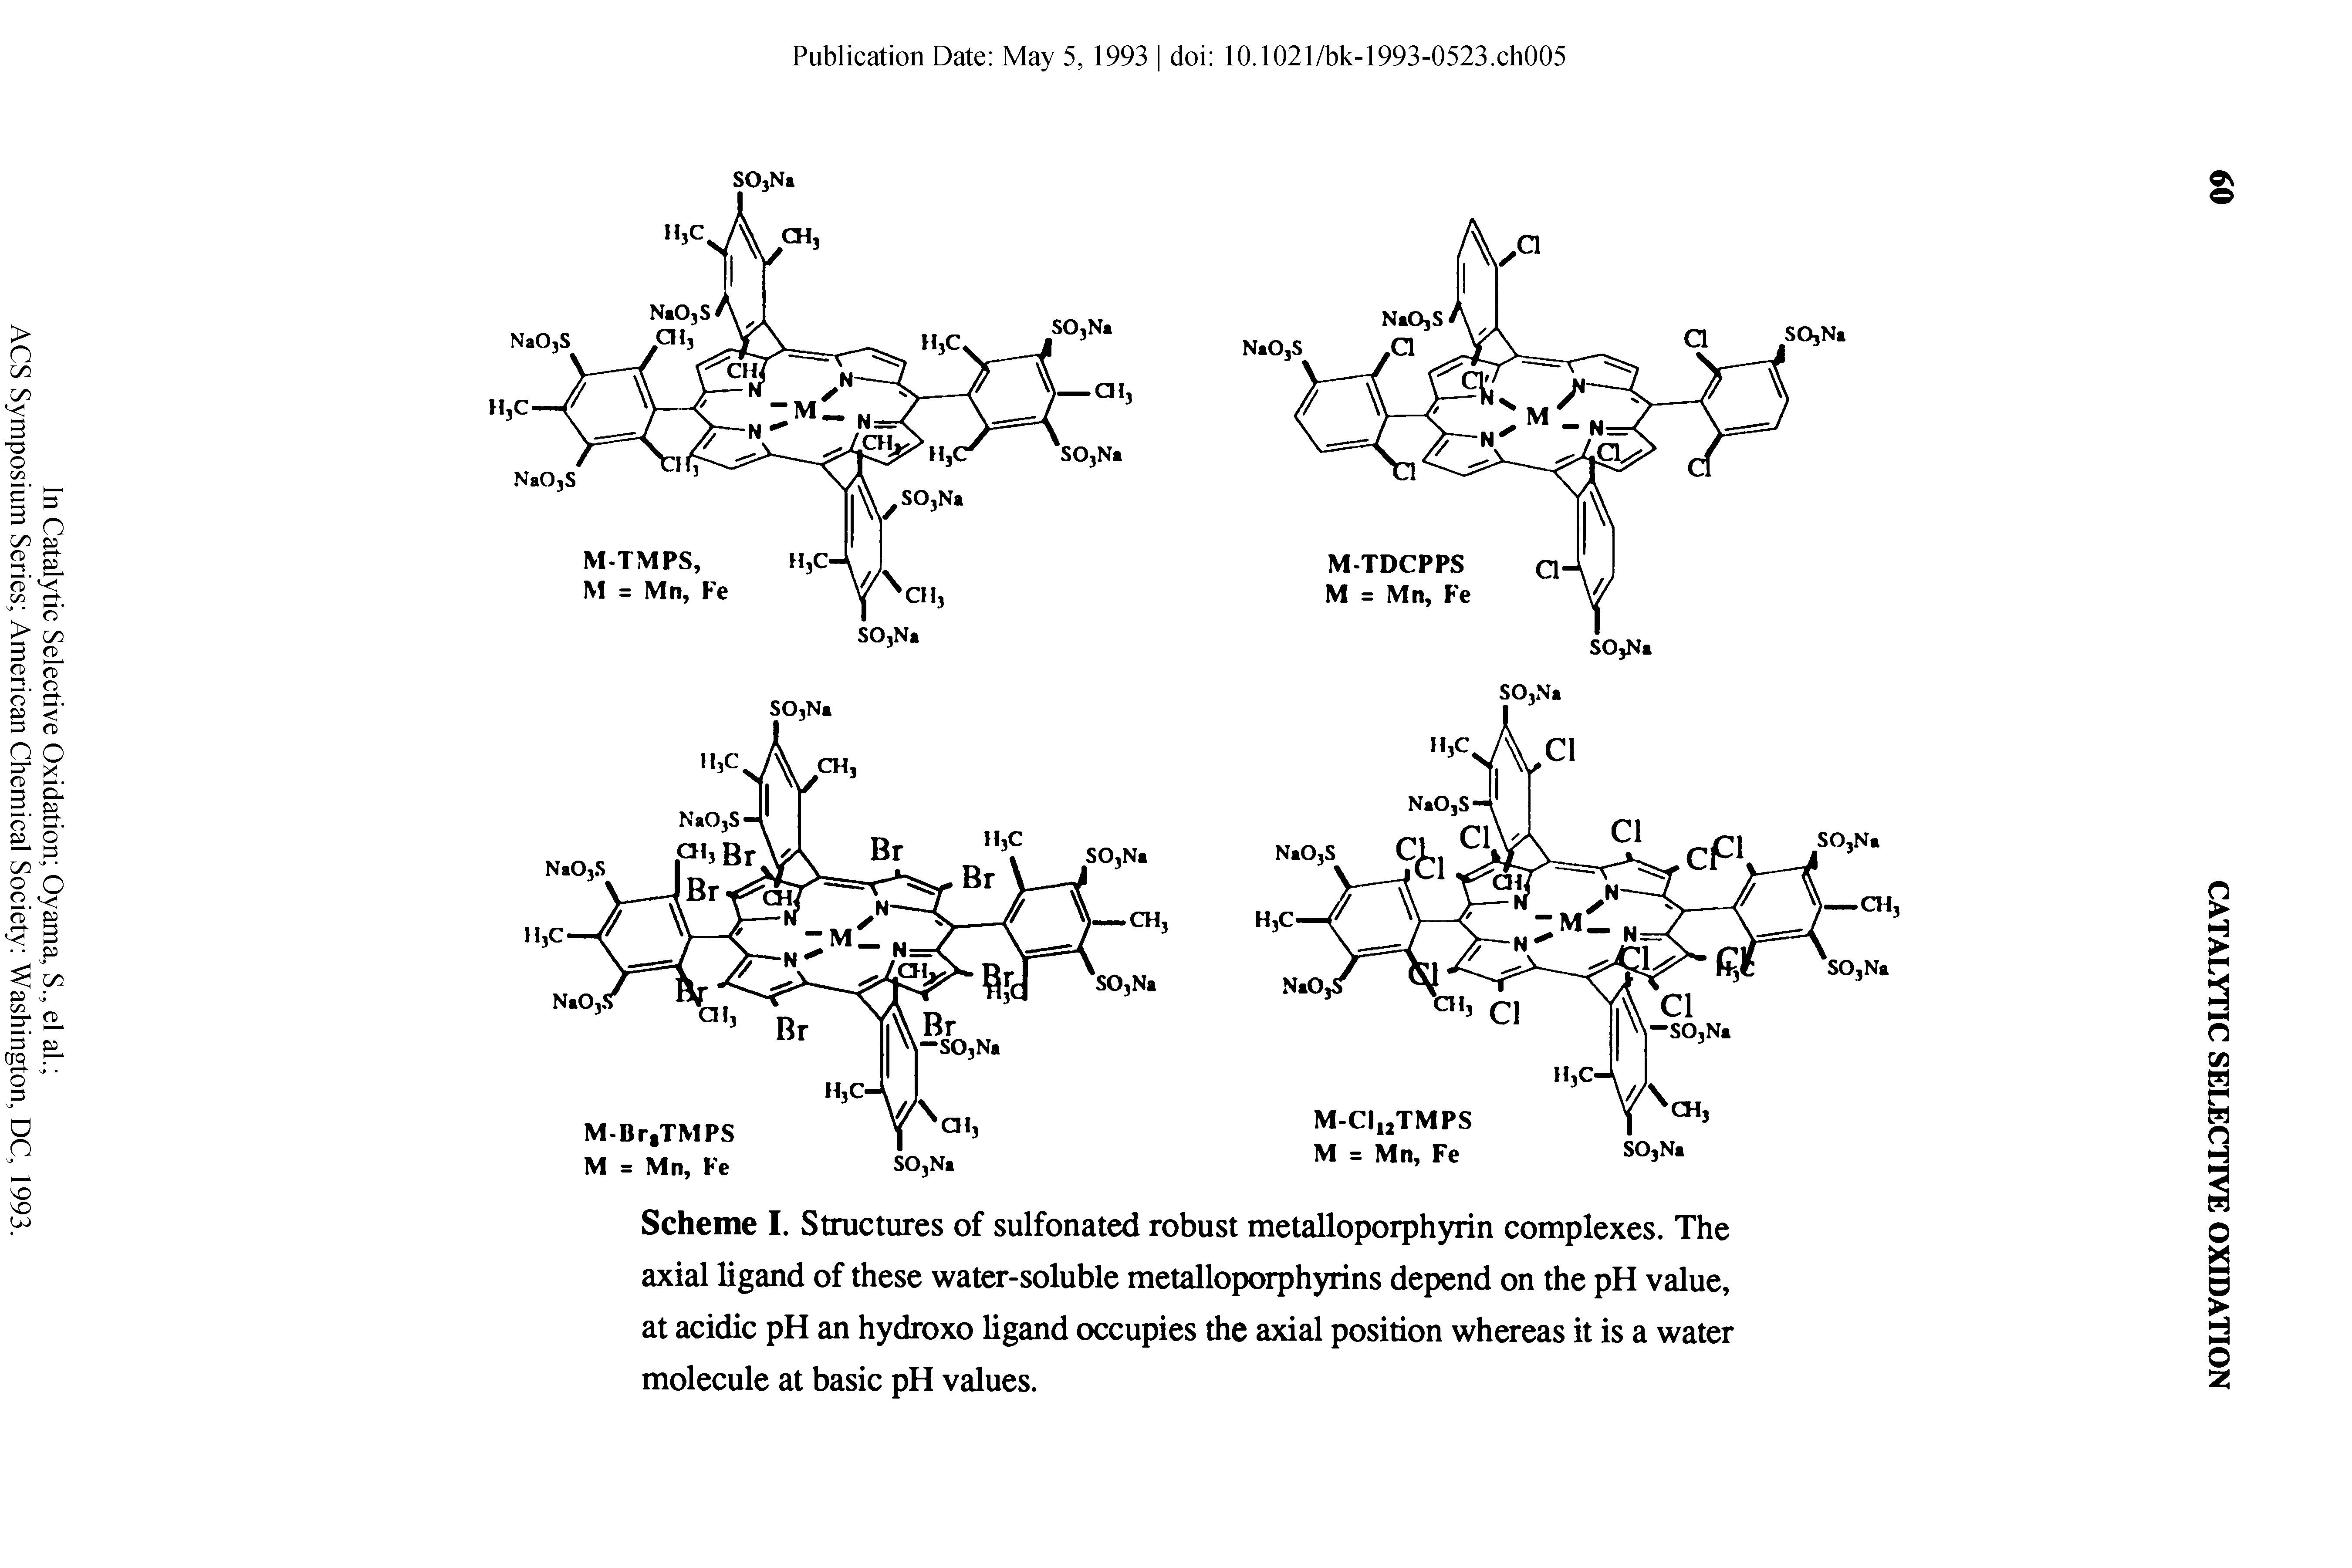 Scheme I. Structures of sulfonated robust metalloporphyrin complexes. The axial ligand of these water-soluble metalloporphyrins depend on the pH value, at acidic pH an hydroxo ligand occupies the axial position whereas it is a water molecule at basic pH values.